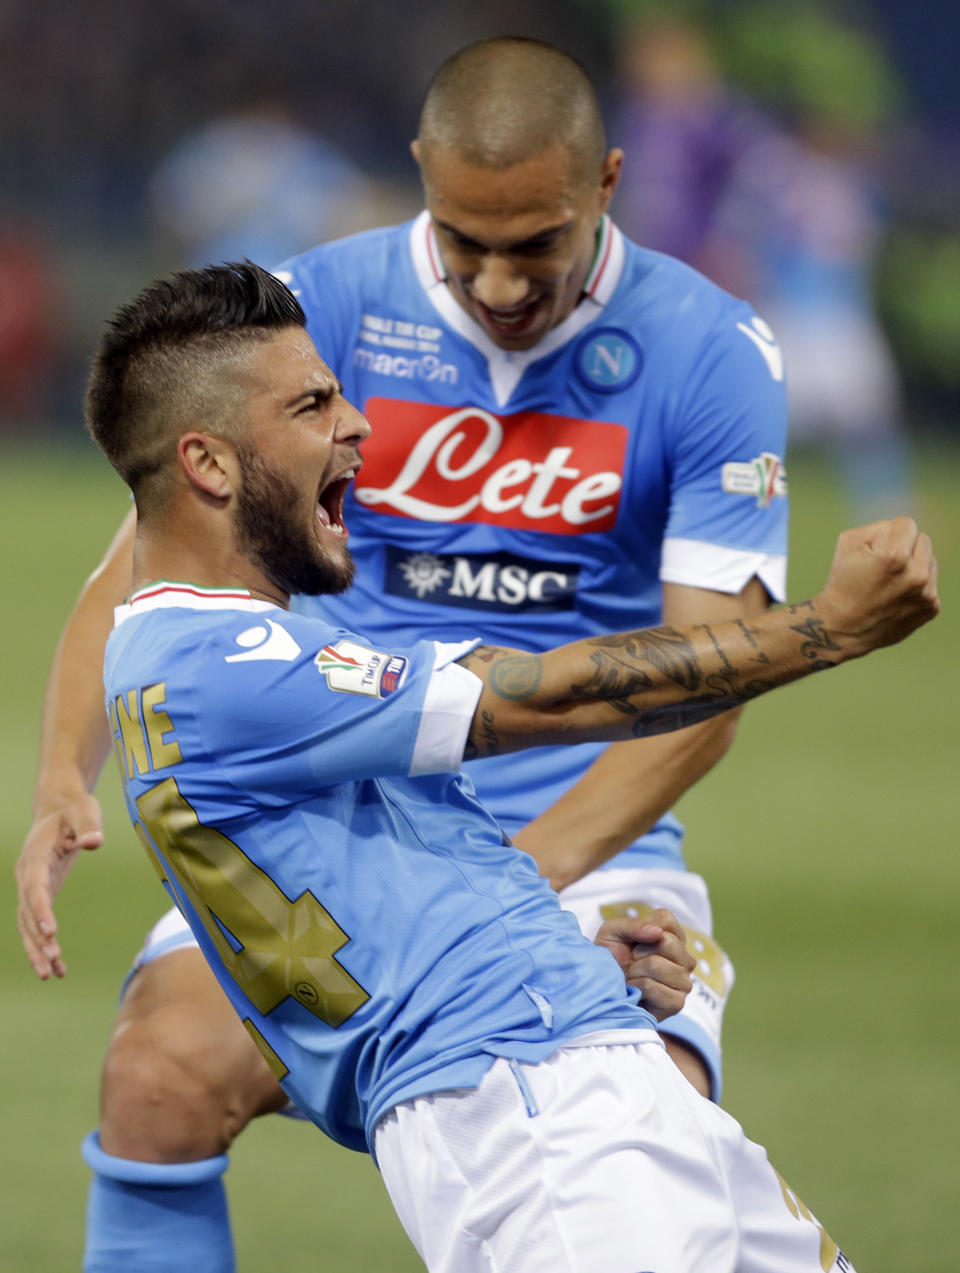 Napoli's Lorenzo Insigne, left, celebrates with teammate Gokhan Inler after he scored during the Italian Cup final match between Fiorentina and Napoli in Rome's Olympic stadium Saturday, May 3, 2014. (AP Photo/Gregorio Borgia)